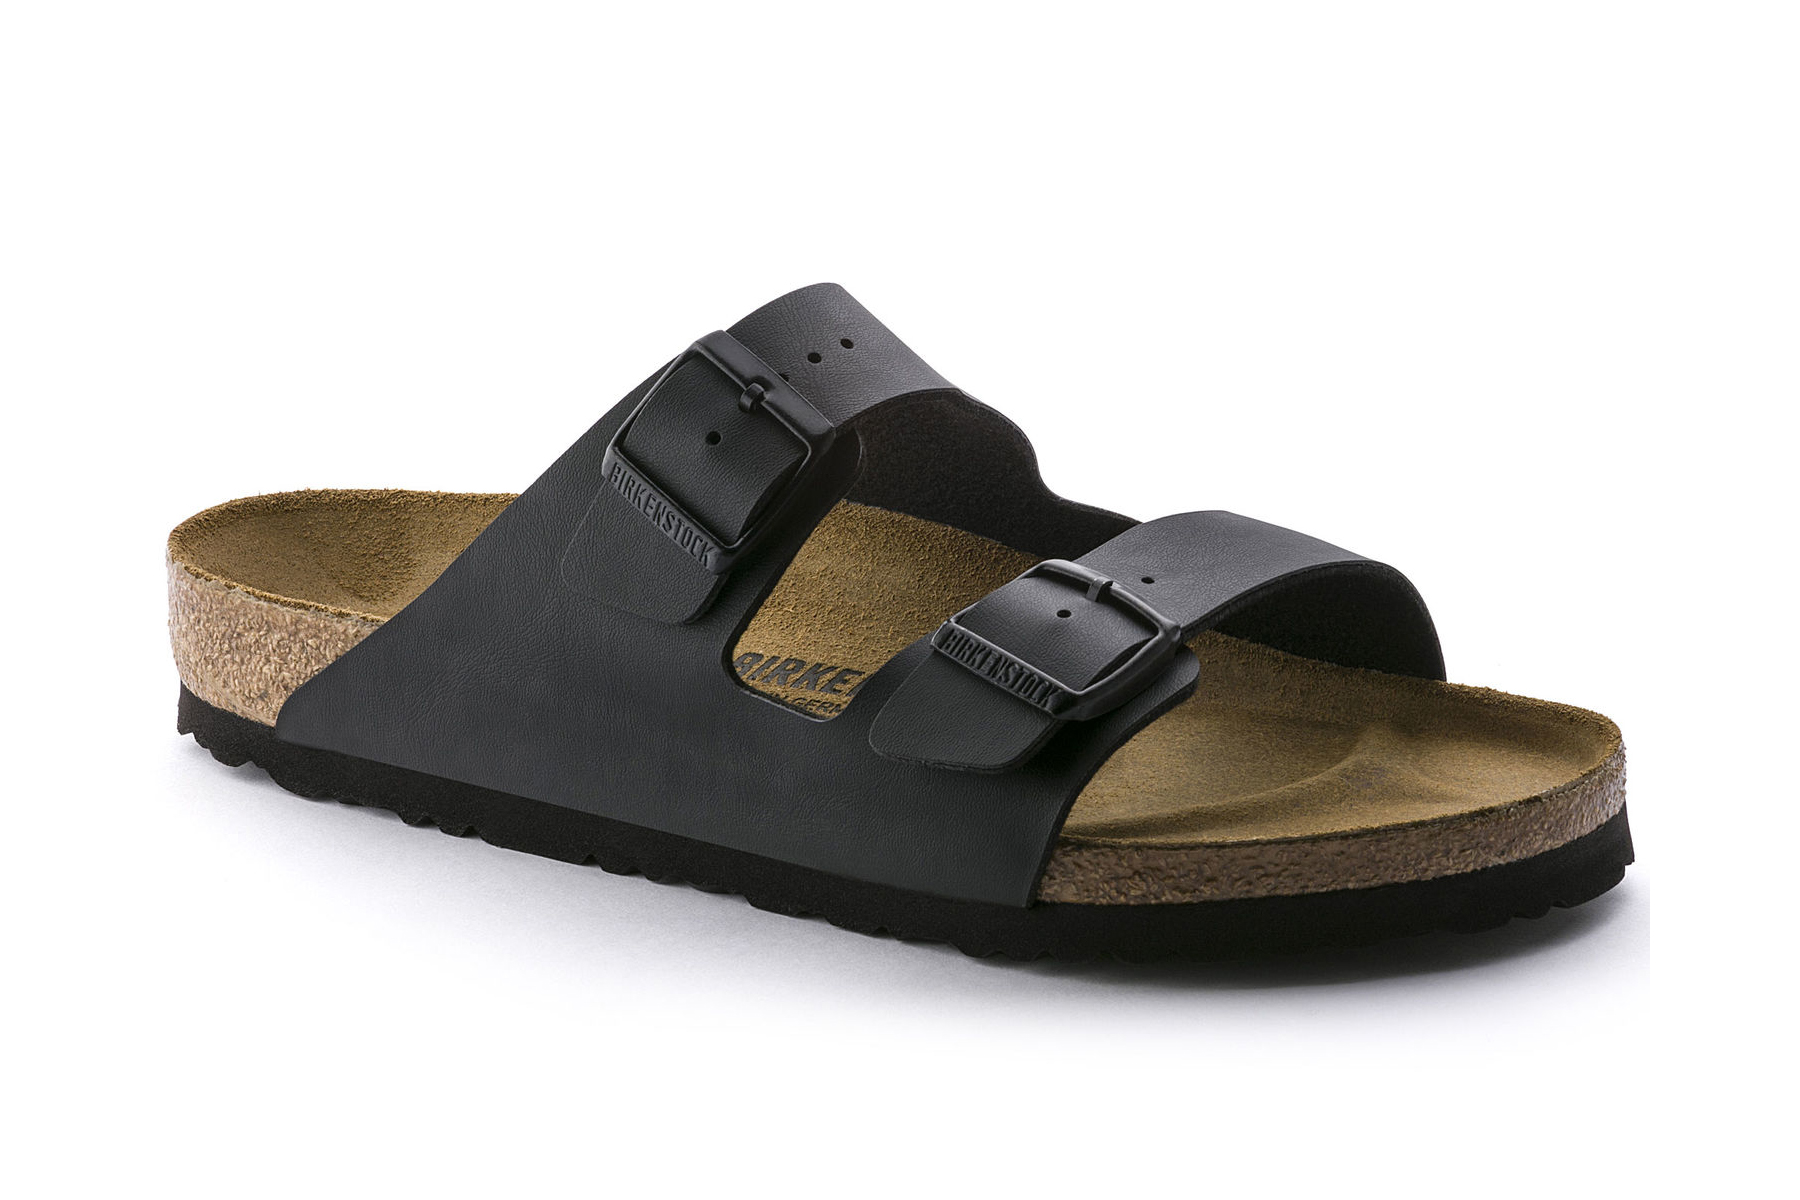 8 Best Orthotic Sandals for Women Over 